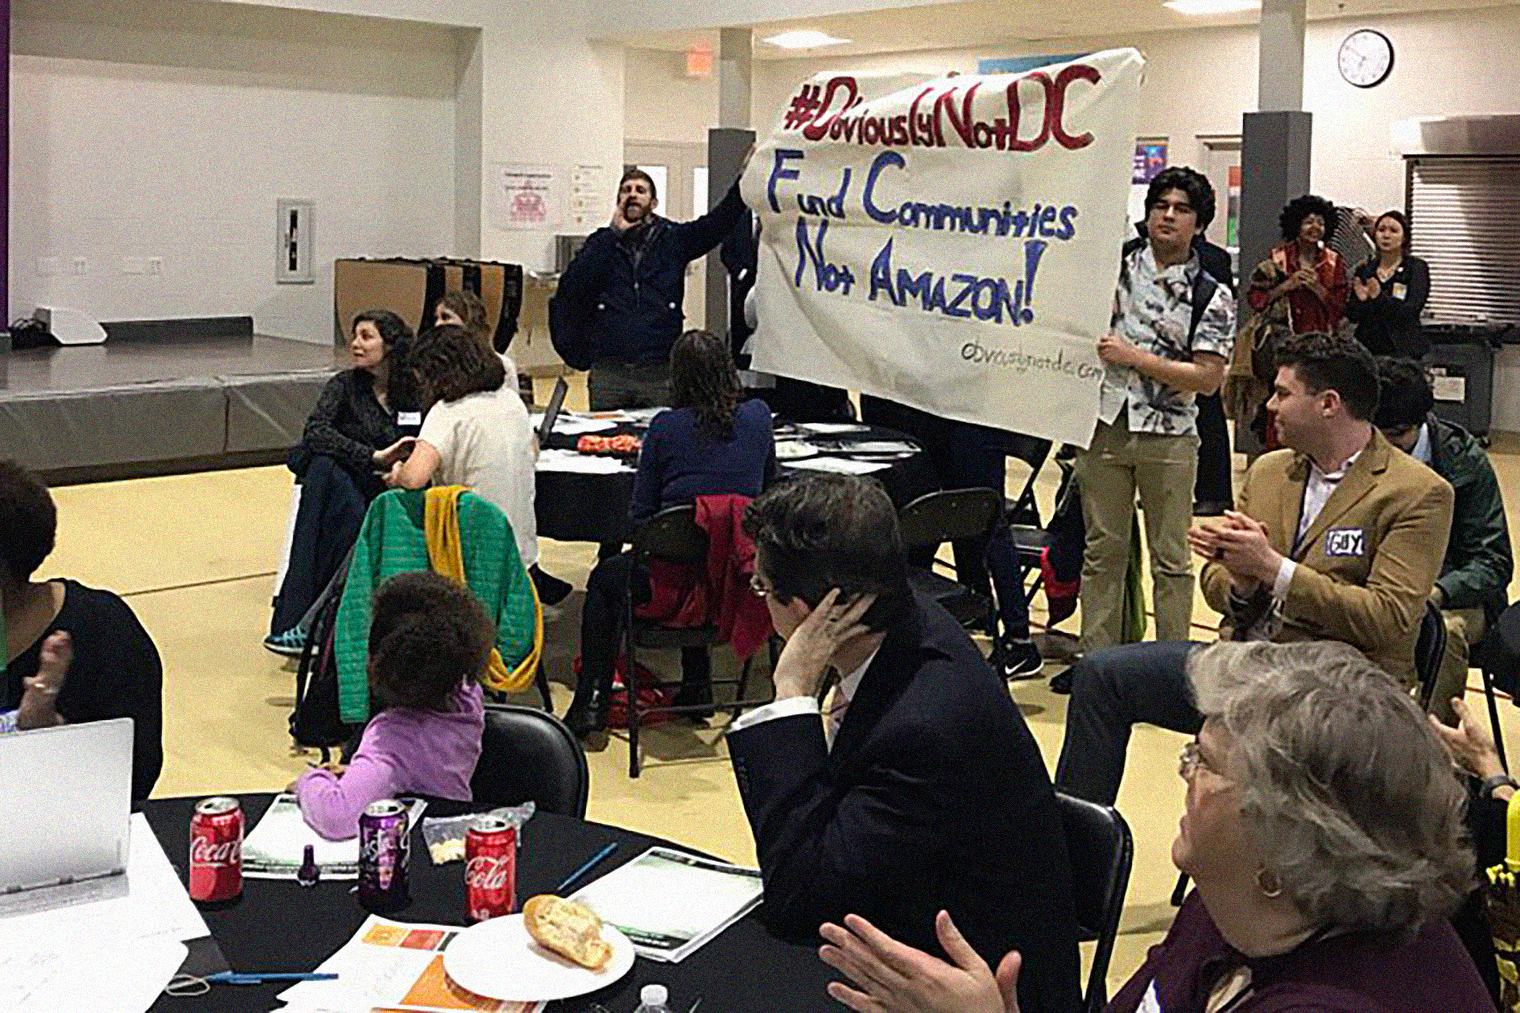 Residents are challenging Mayor Bowser to fund communities, housing, schools and transit, not give away our money to the worlds richest man and Amazon, Watkins Field Recreation Center, Washington, D.C., February 22, 2018.